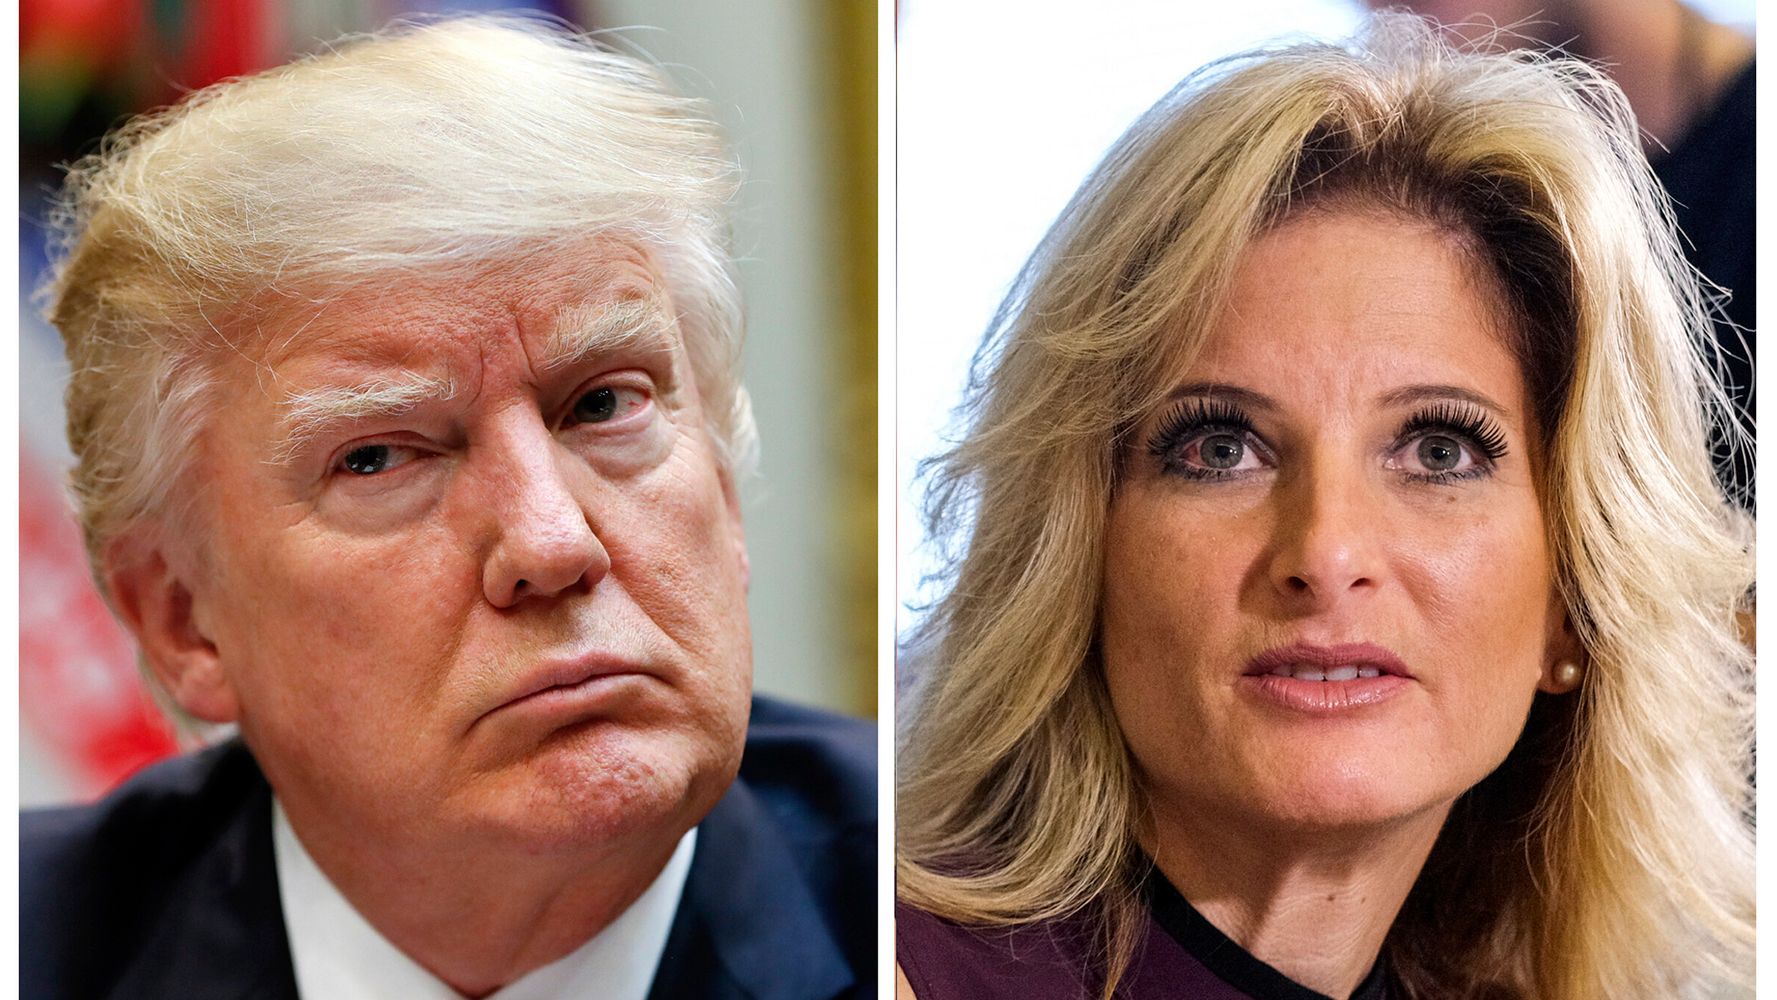 Trump Faces Deadline For Questioning In Defamation Suit